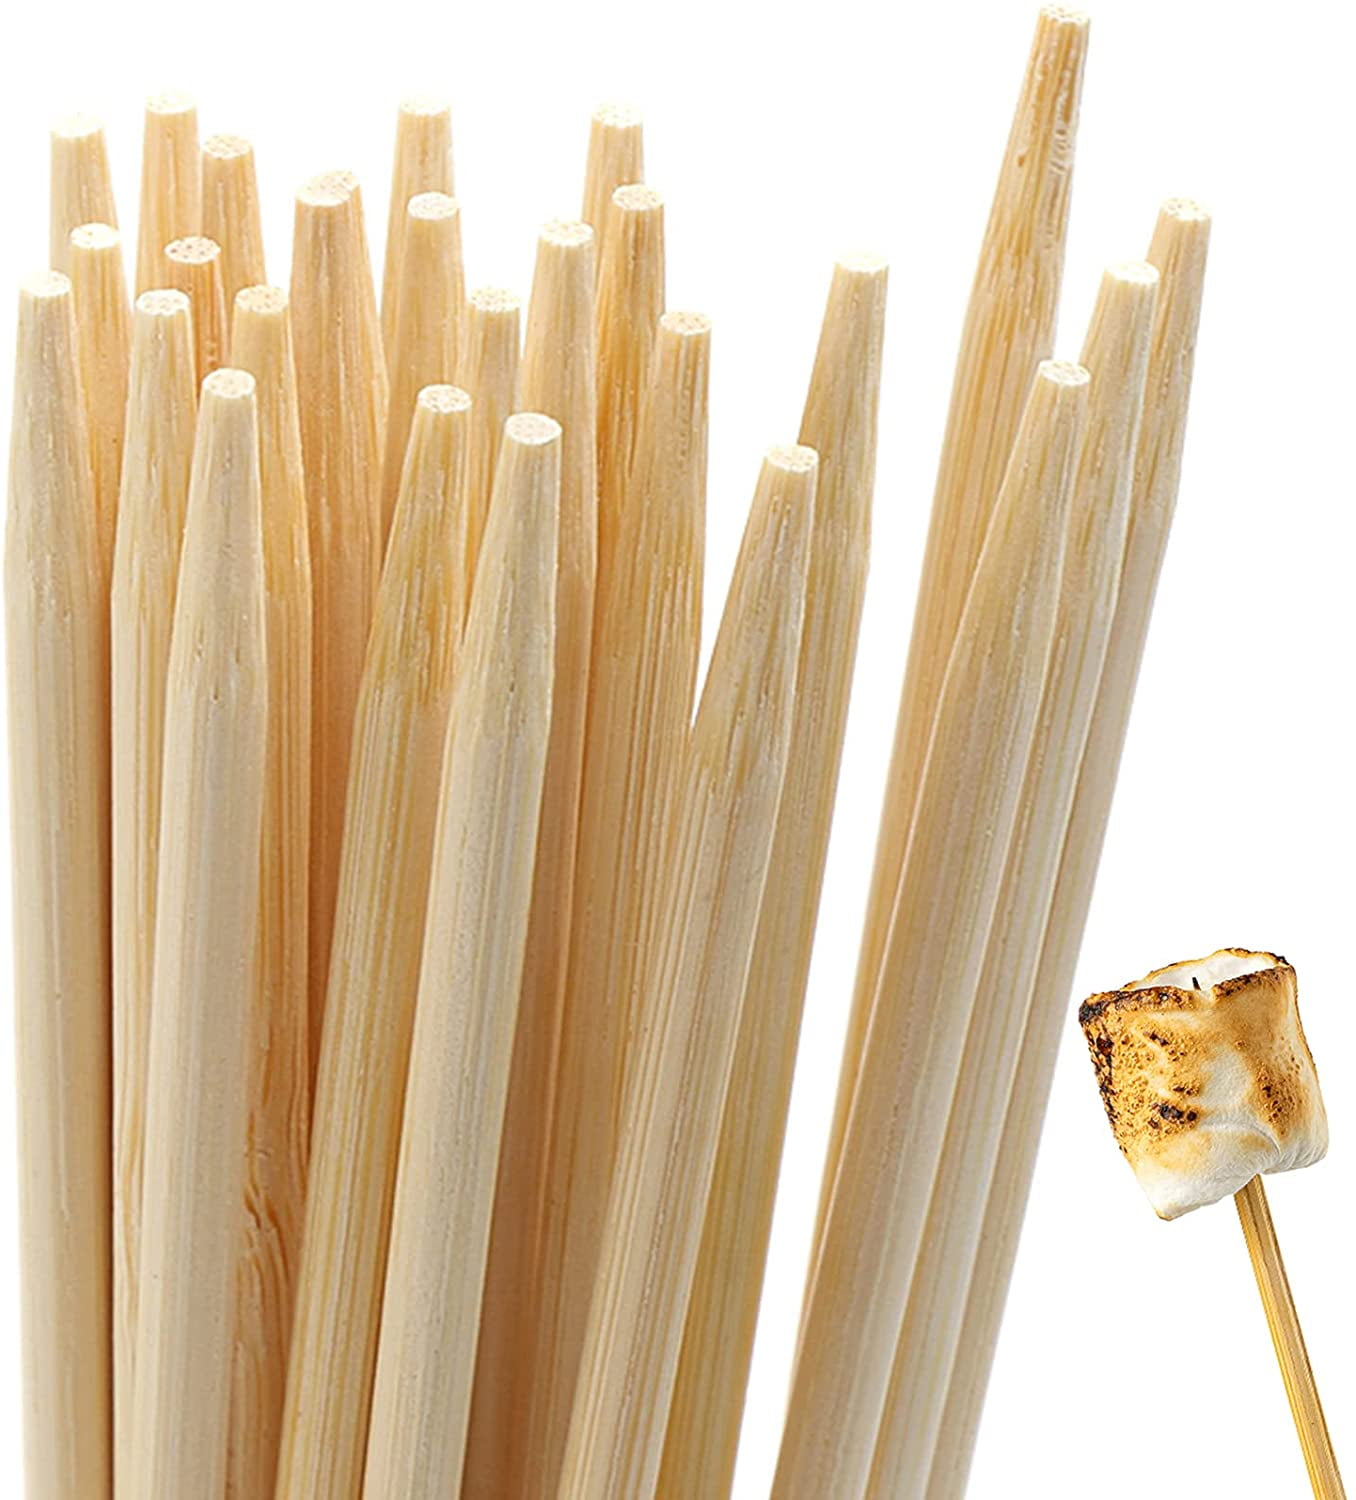 Bamboo Skewer Sticks, 600 Pack of 12 inch Organic Wooden Barbecue Kabob  Skewers, Best for Grill, BBQ, Kebab, Marshmallow Roasting or Fruit Sticks